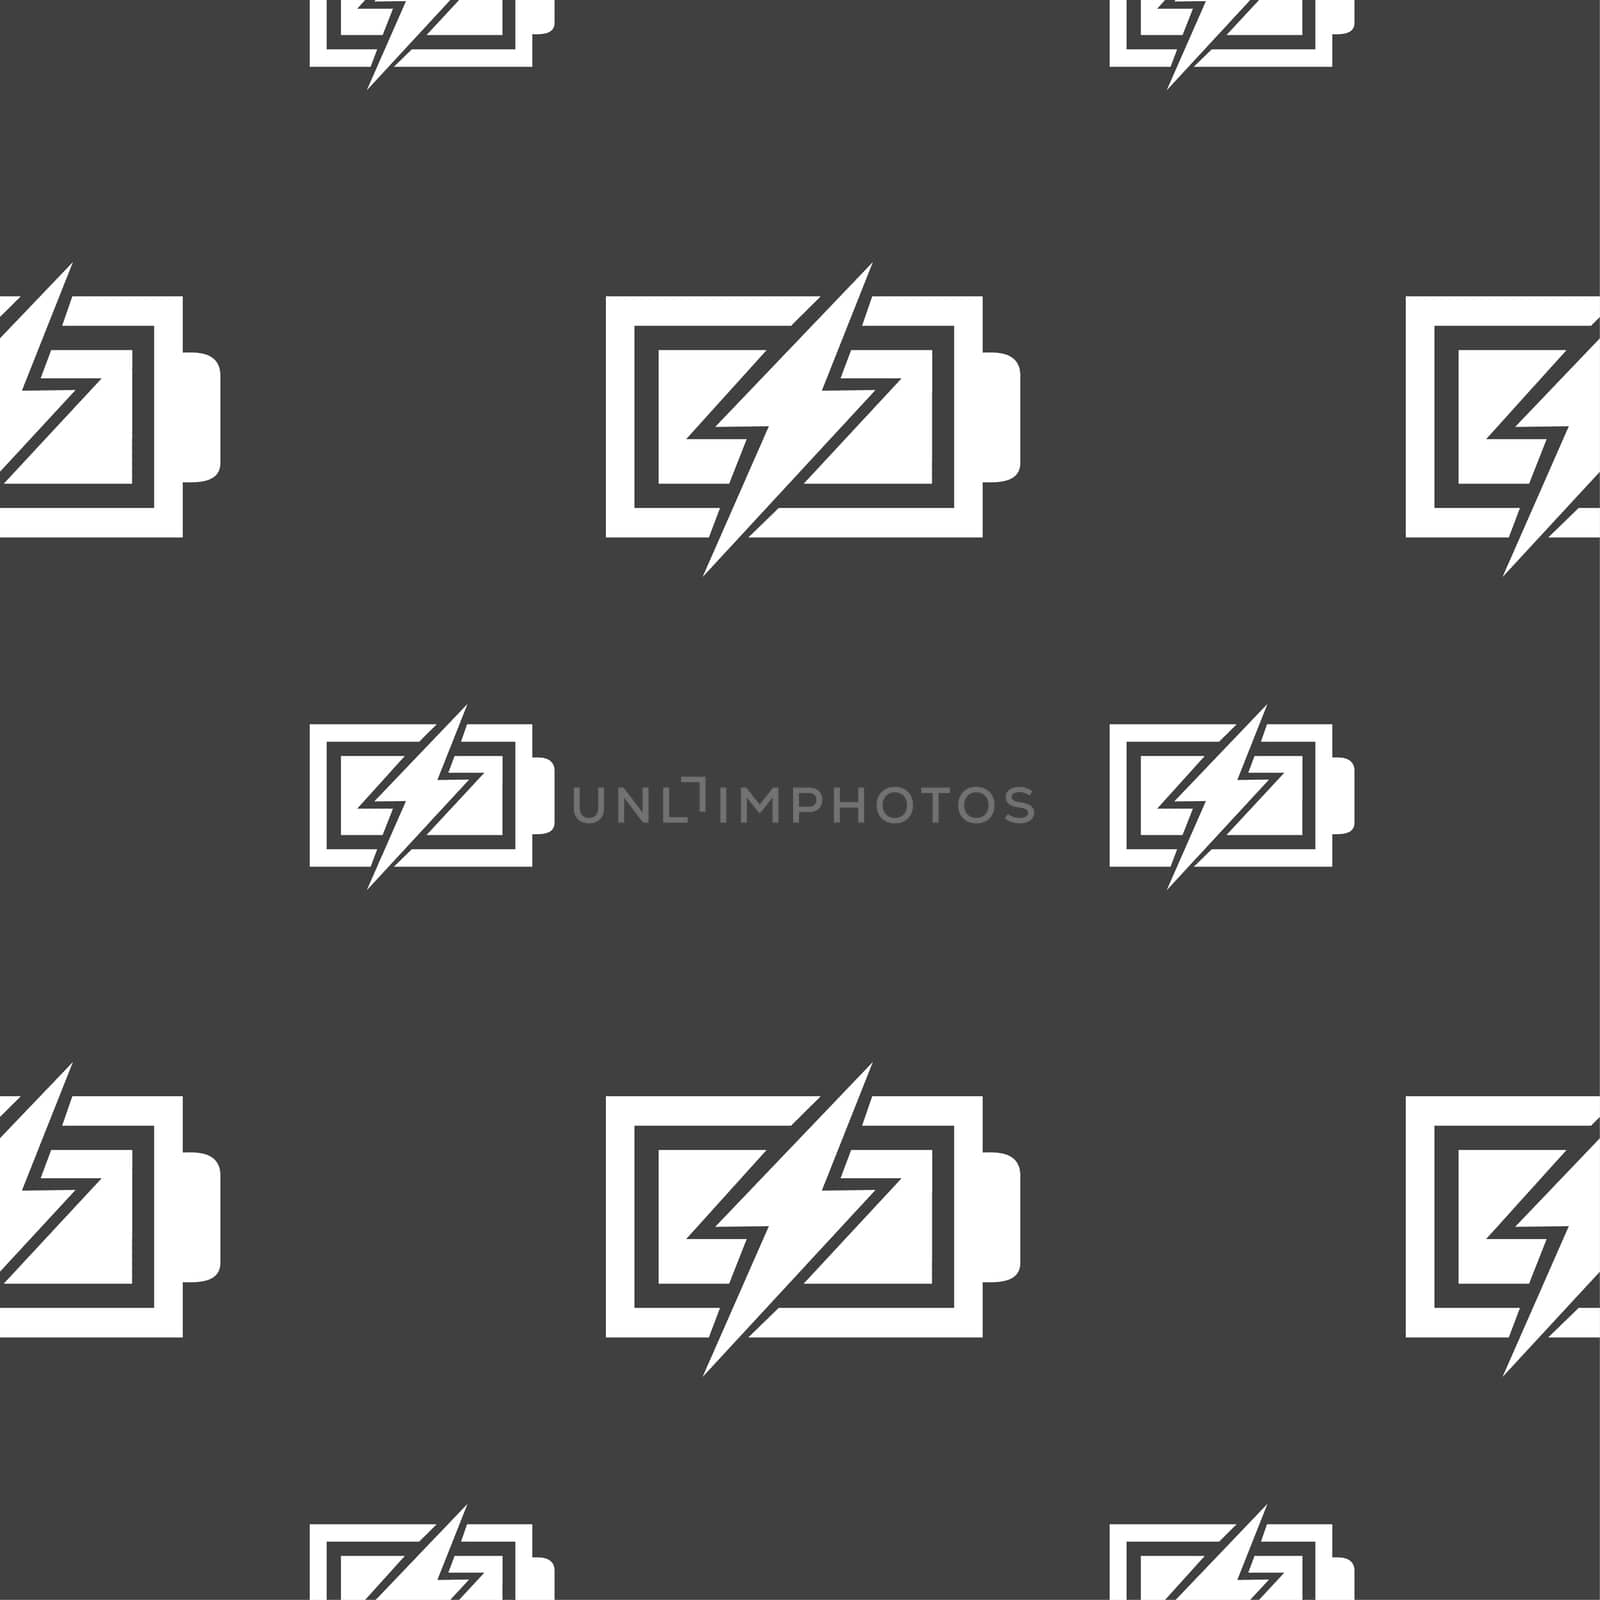 Battery charging sign icon. Lightning symbol. Seamless pattern on a gray background. illustration